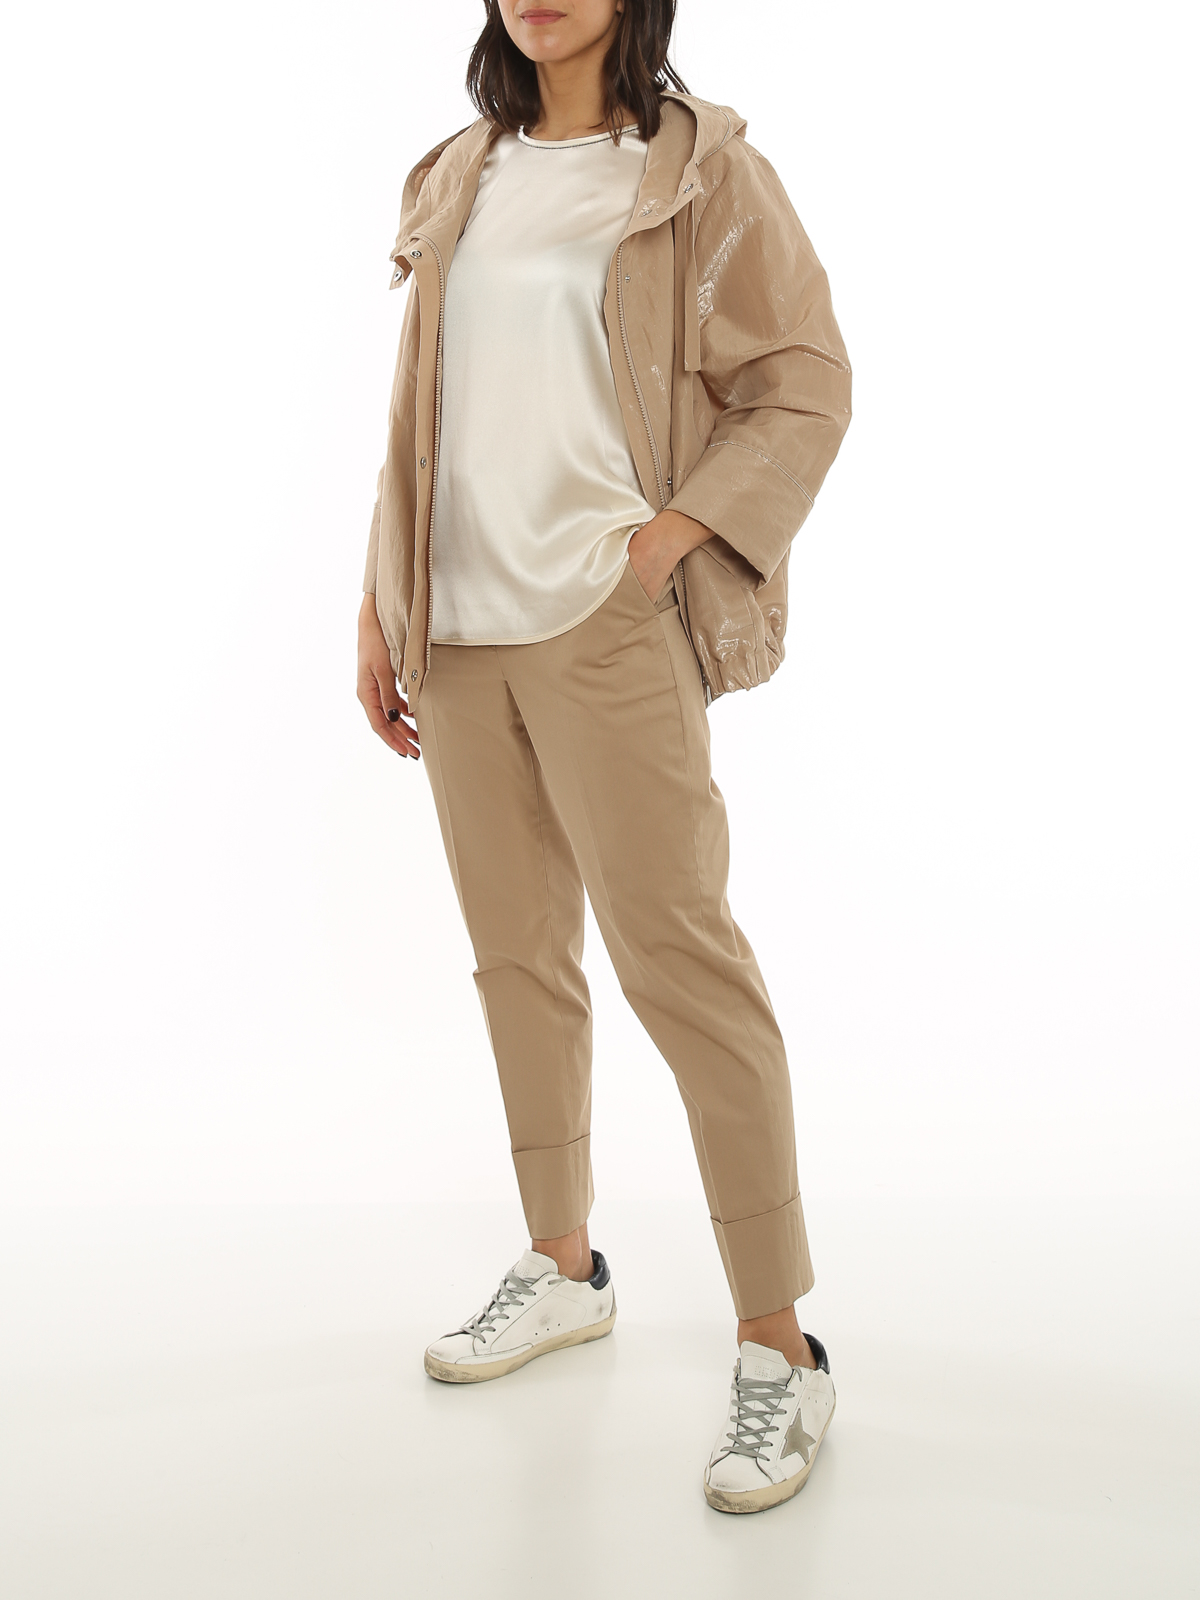 Peserico Trousers Womens Trousers Slacks and Chinos Peserico Trousers Slacks and Chinos 